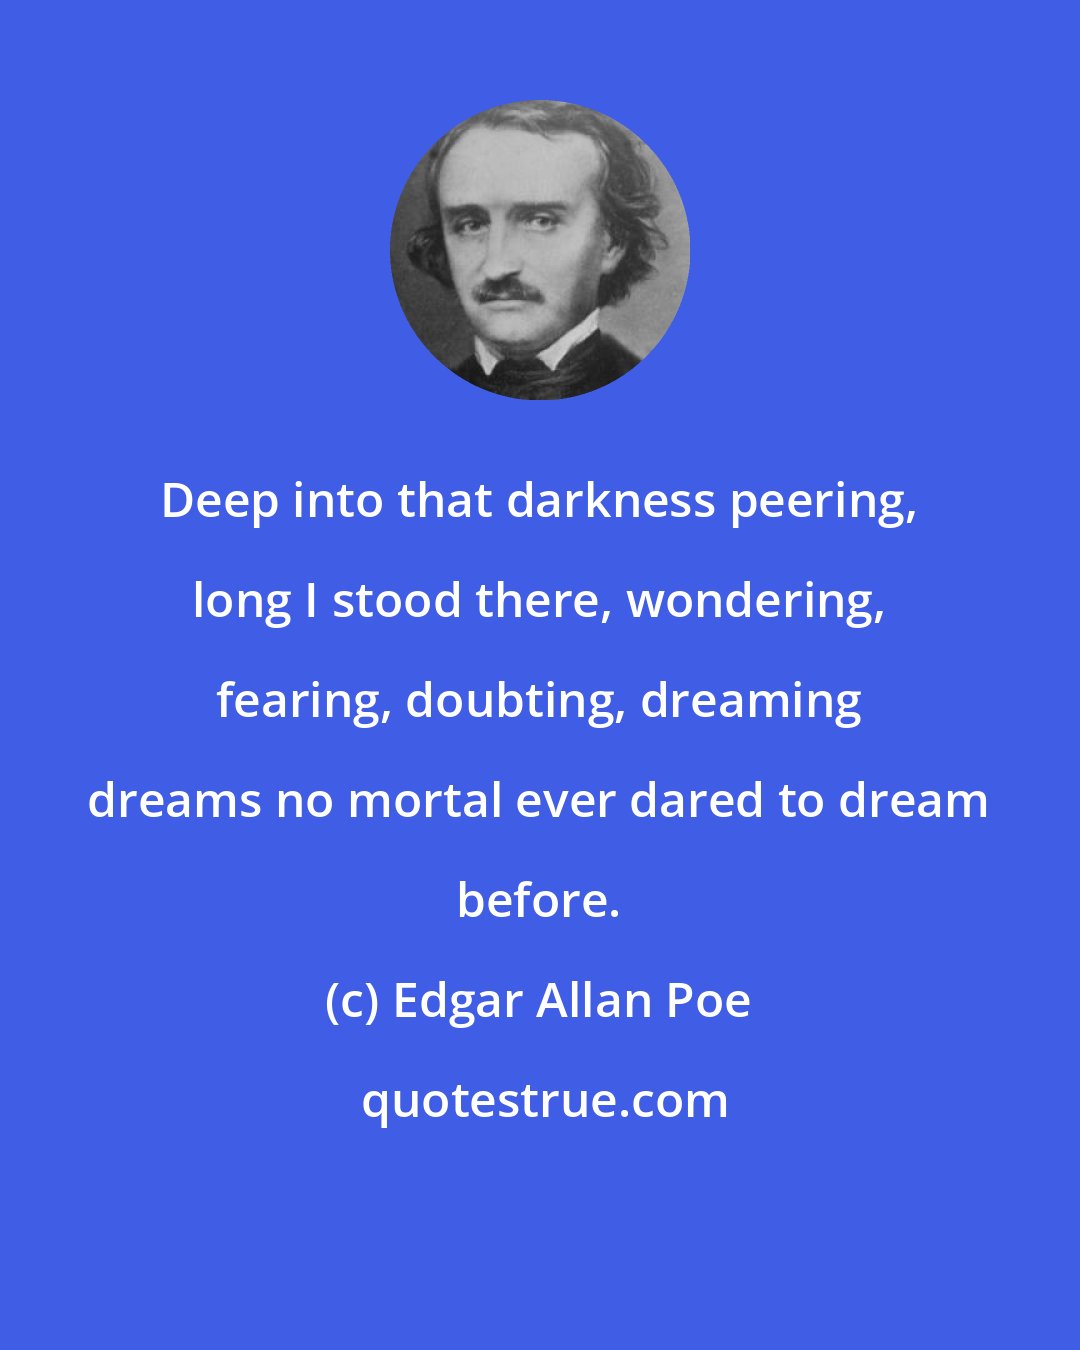 Edgar Allan Poe: Deep into that darkness peering, long I stood there, wondering, fearing, doubting, dreaming dreams no mortal ever dared to dream before.